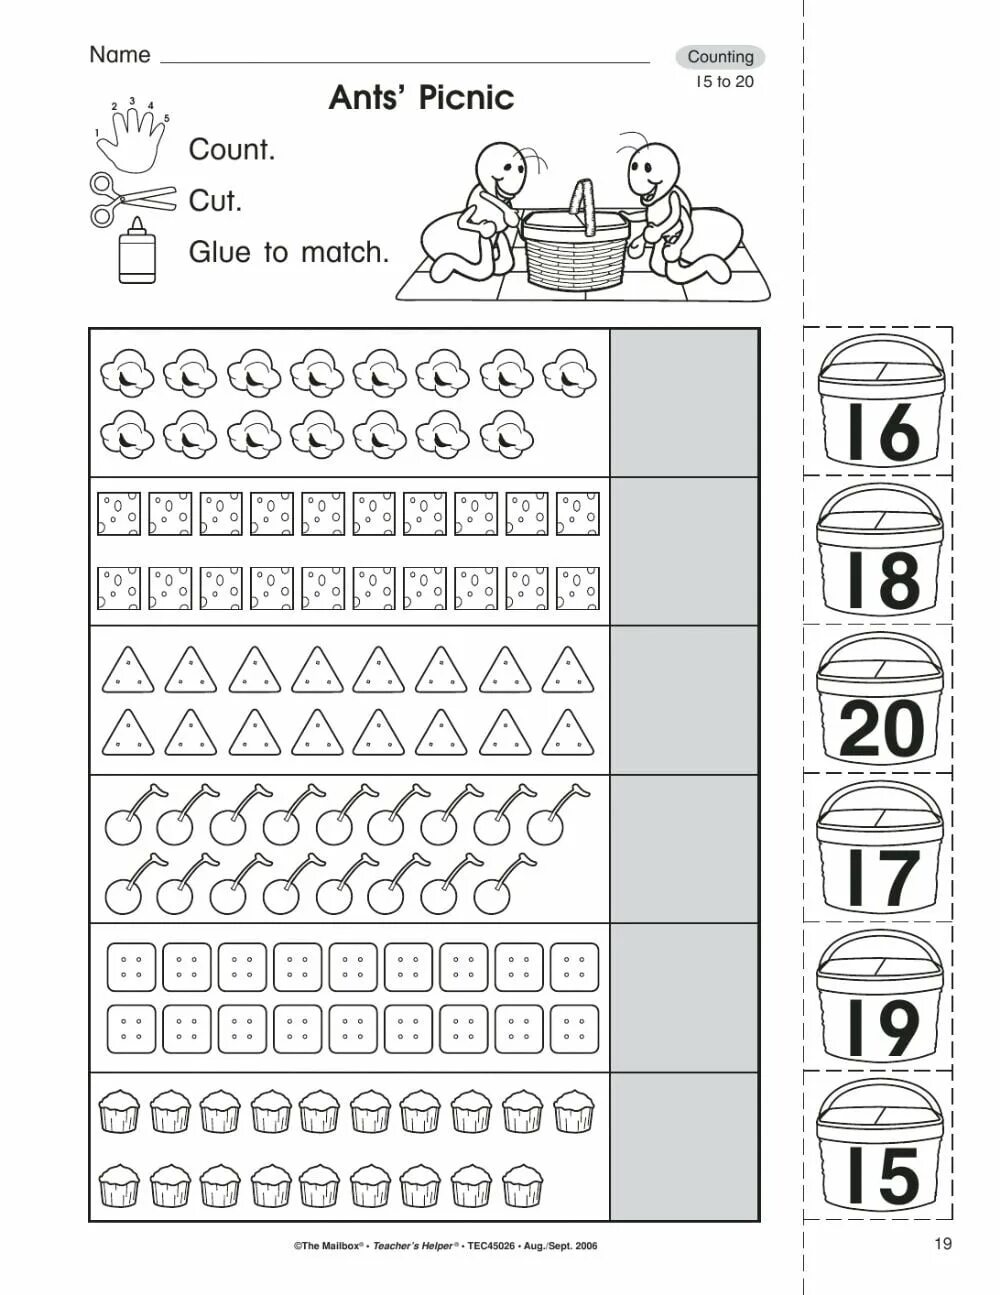 Numbers 1 20 worksheets. Numbers 11-20 задания для малышей. Count from 1 to 20. Count to 20 Worksheets. Задания numbers 1-15.